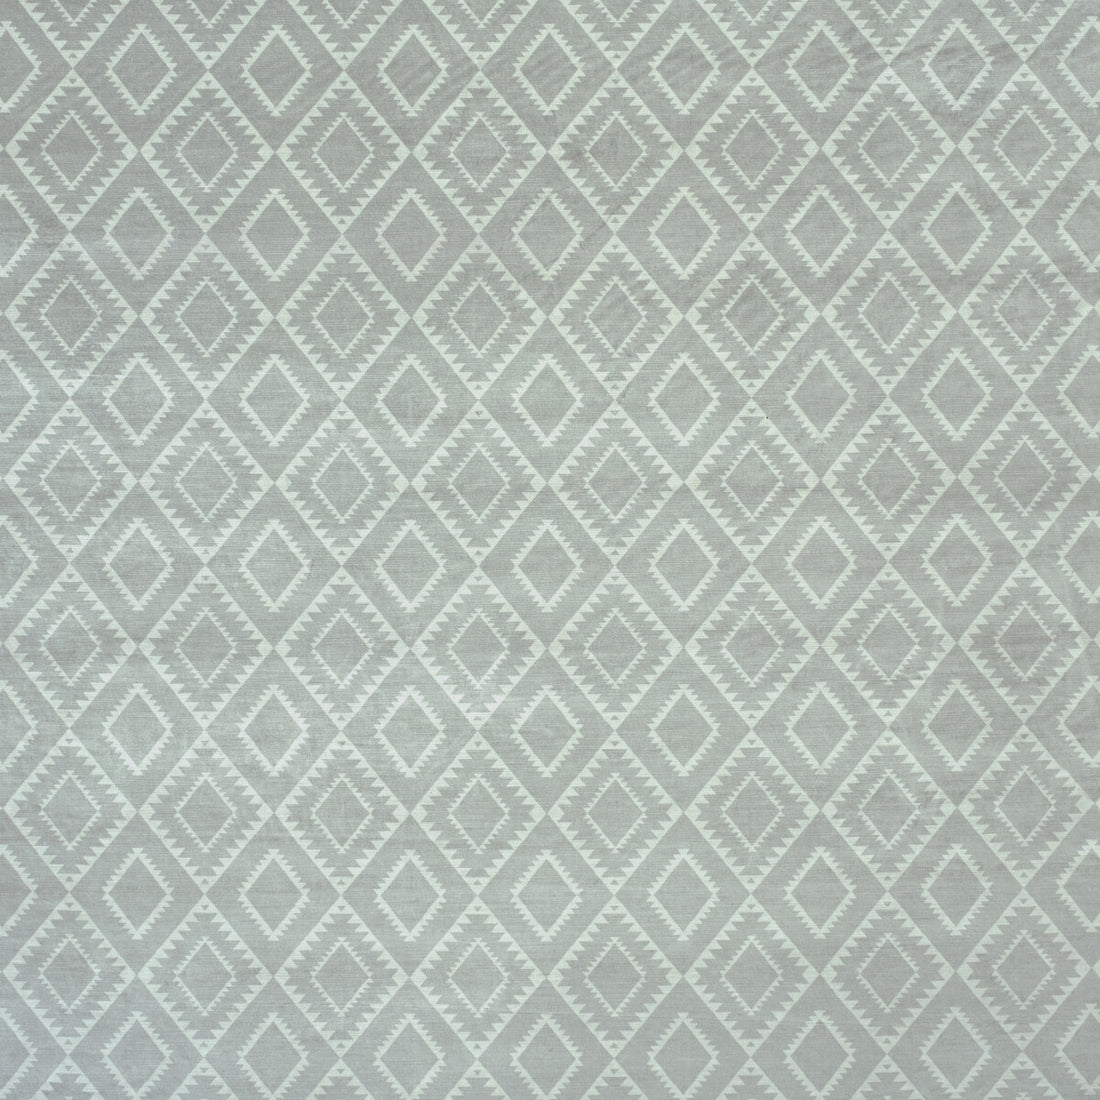 Trullo fabric in stone color - pattern AM100334.106.0 - by Kravet Couture in the Andrew Martin Salento collection